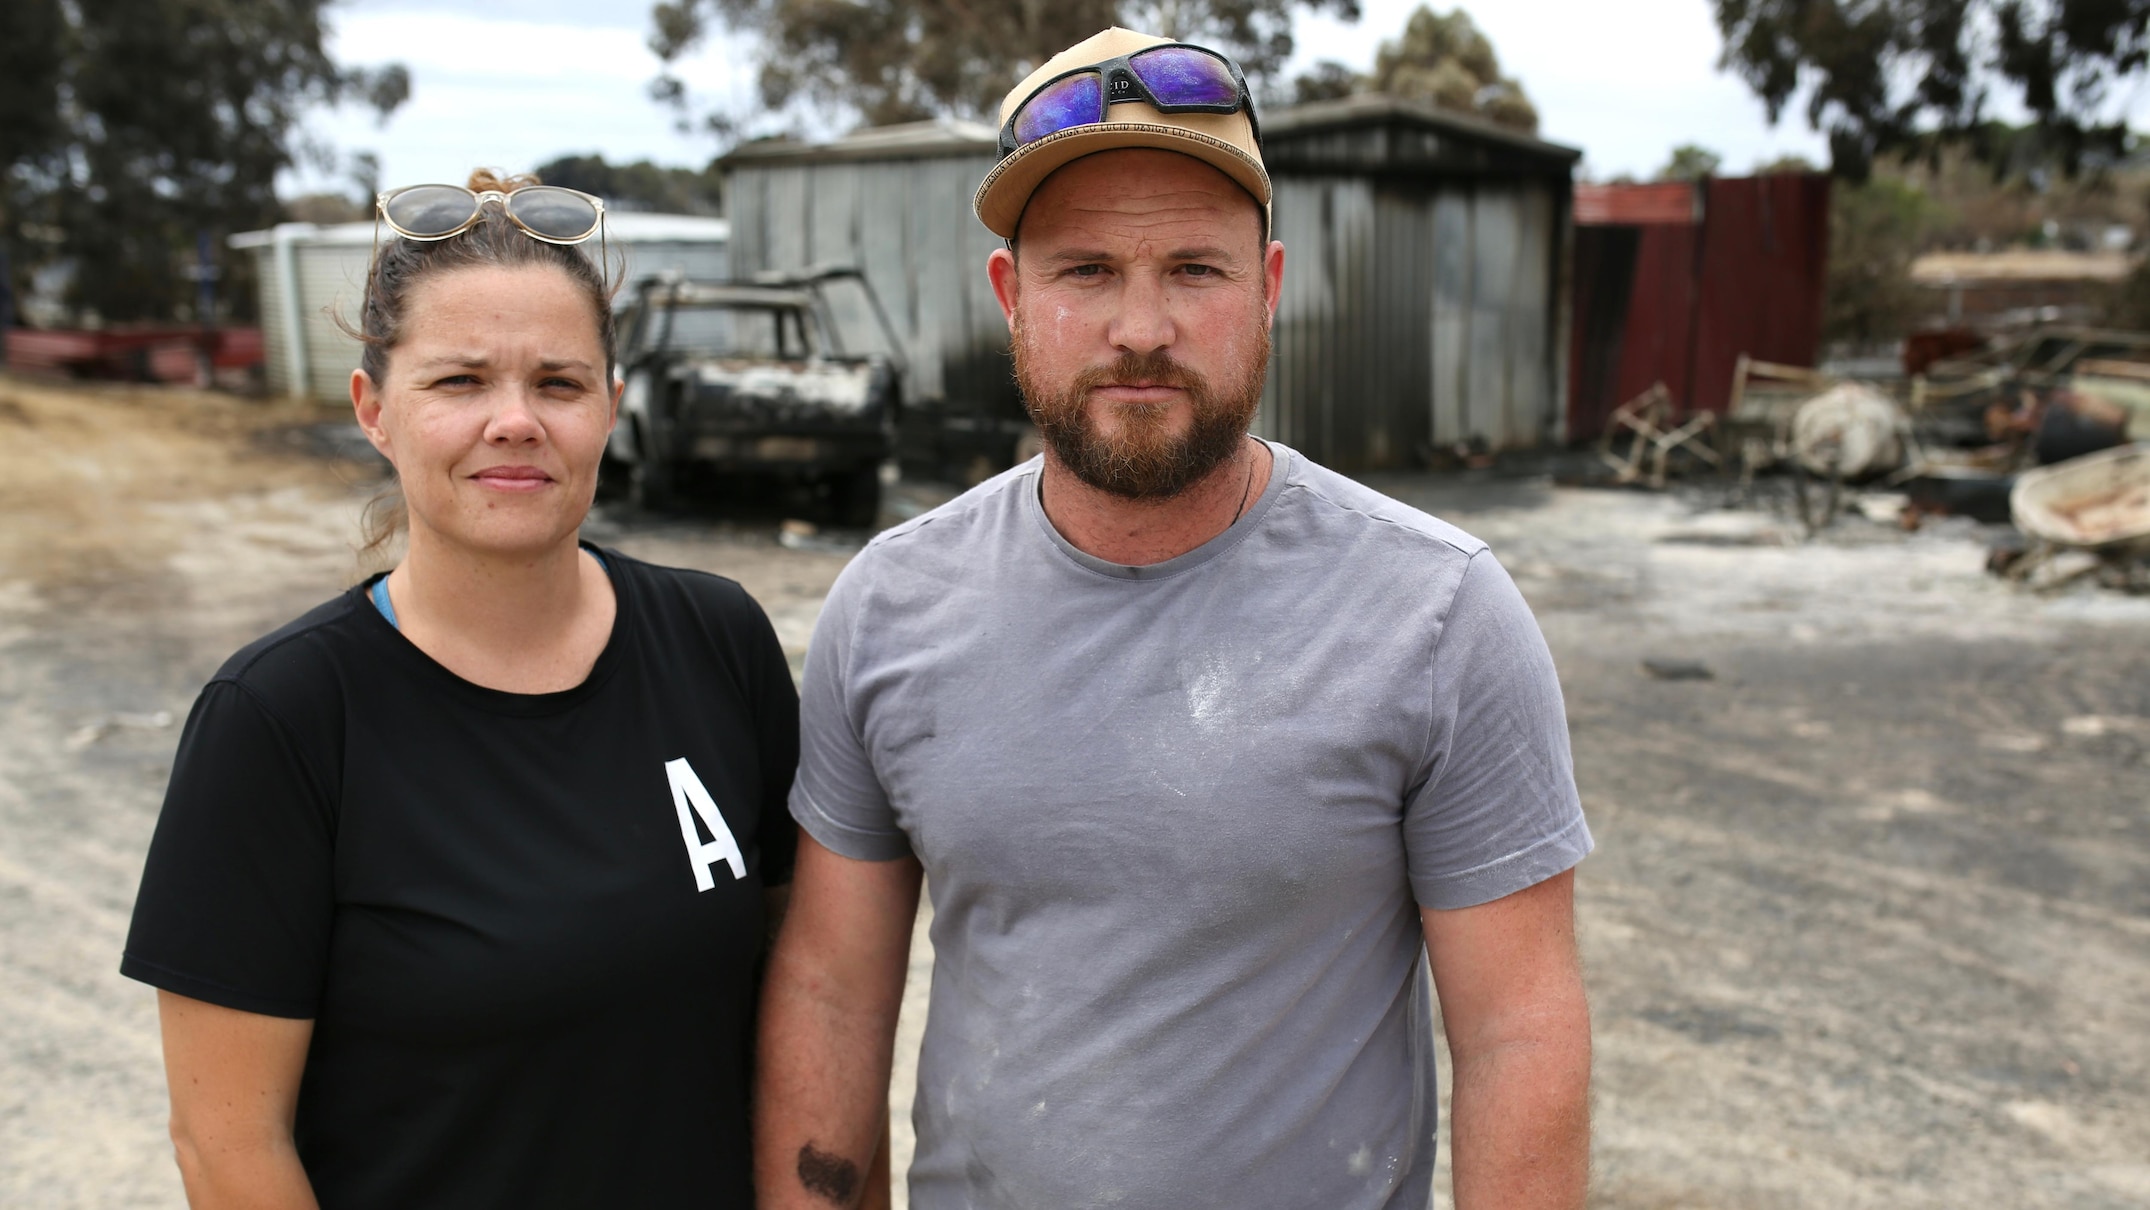 mariginiup residents and businesses begin picking up the pieces after bushfire devastation